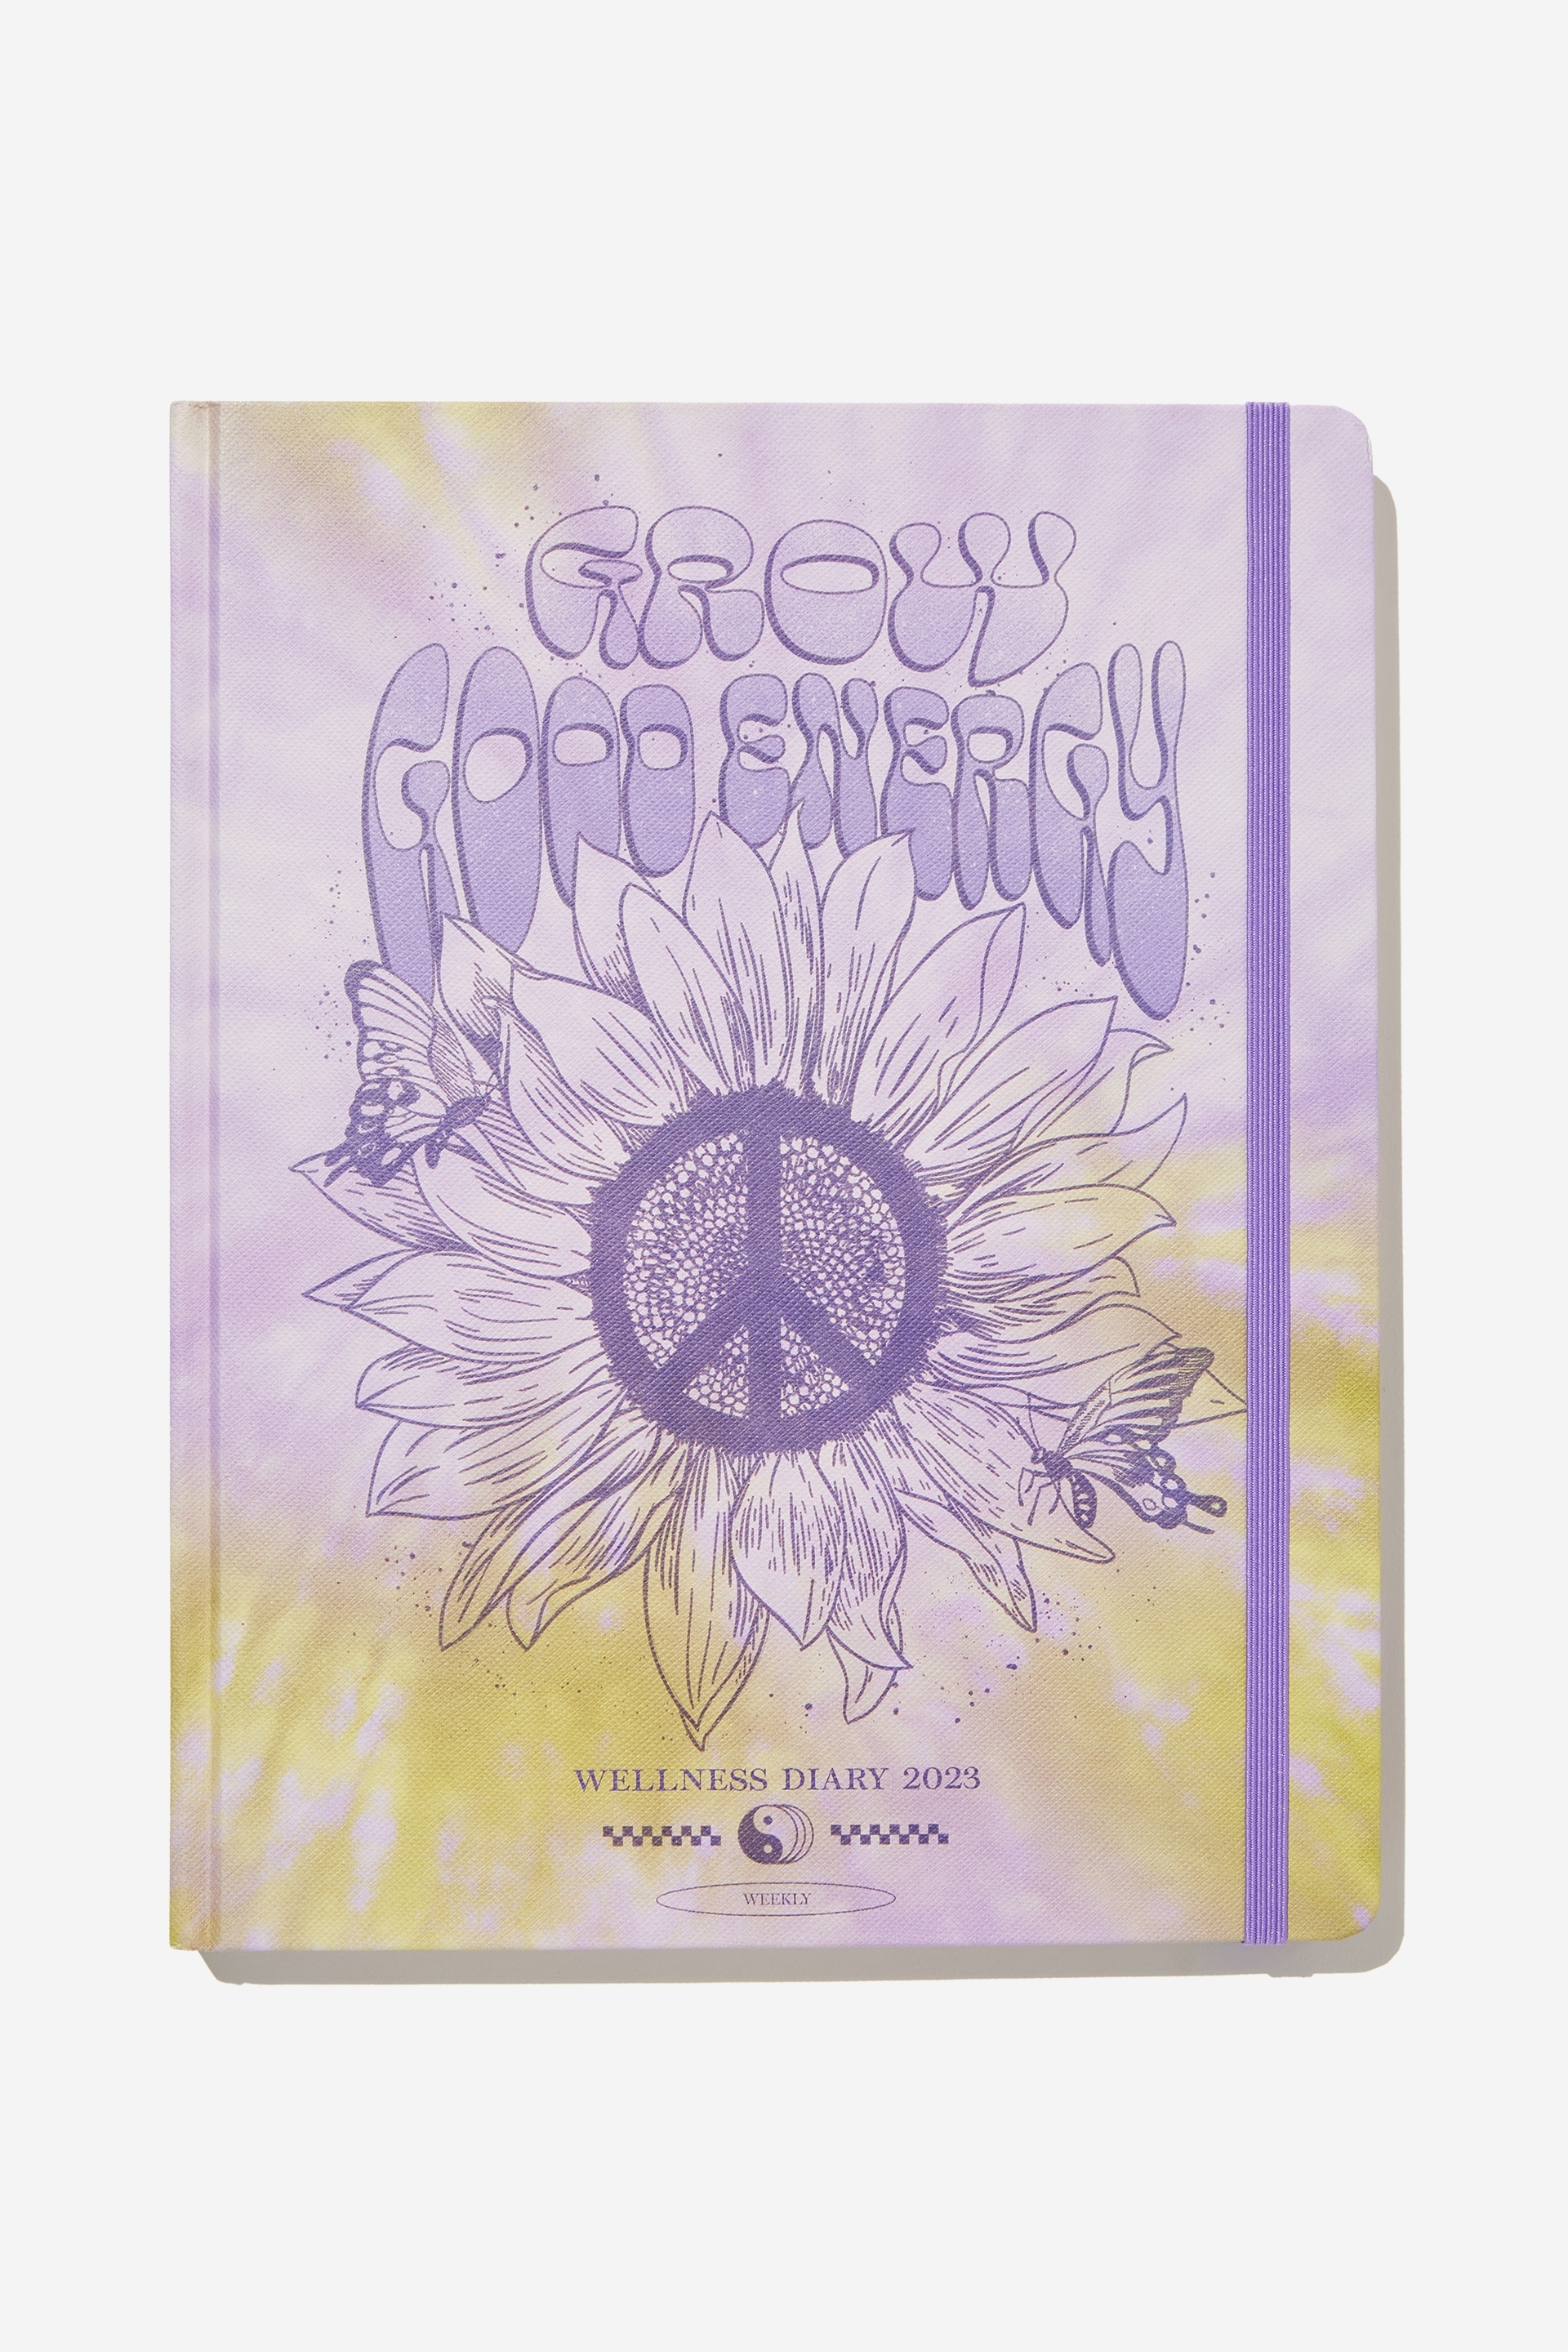 Typo - 2023 Large Weekly Wellness Diary - Peace sunflower